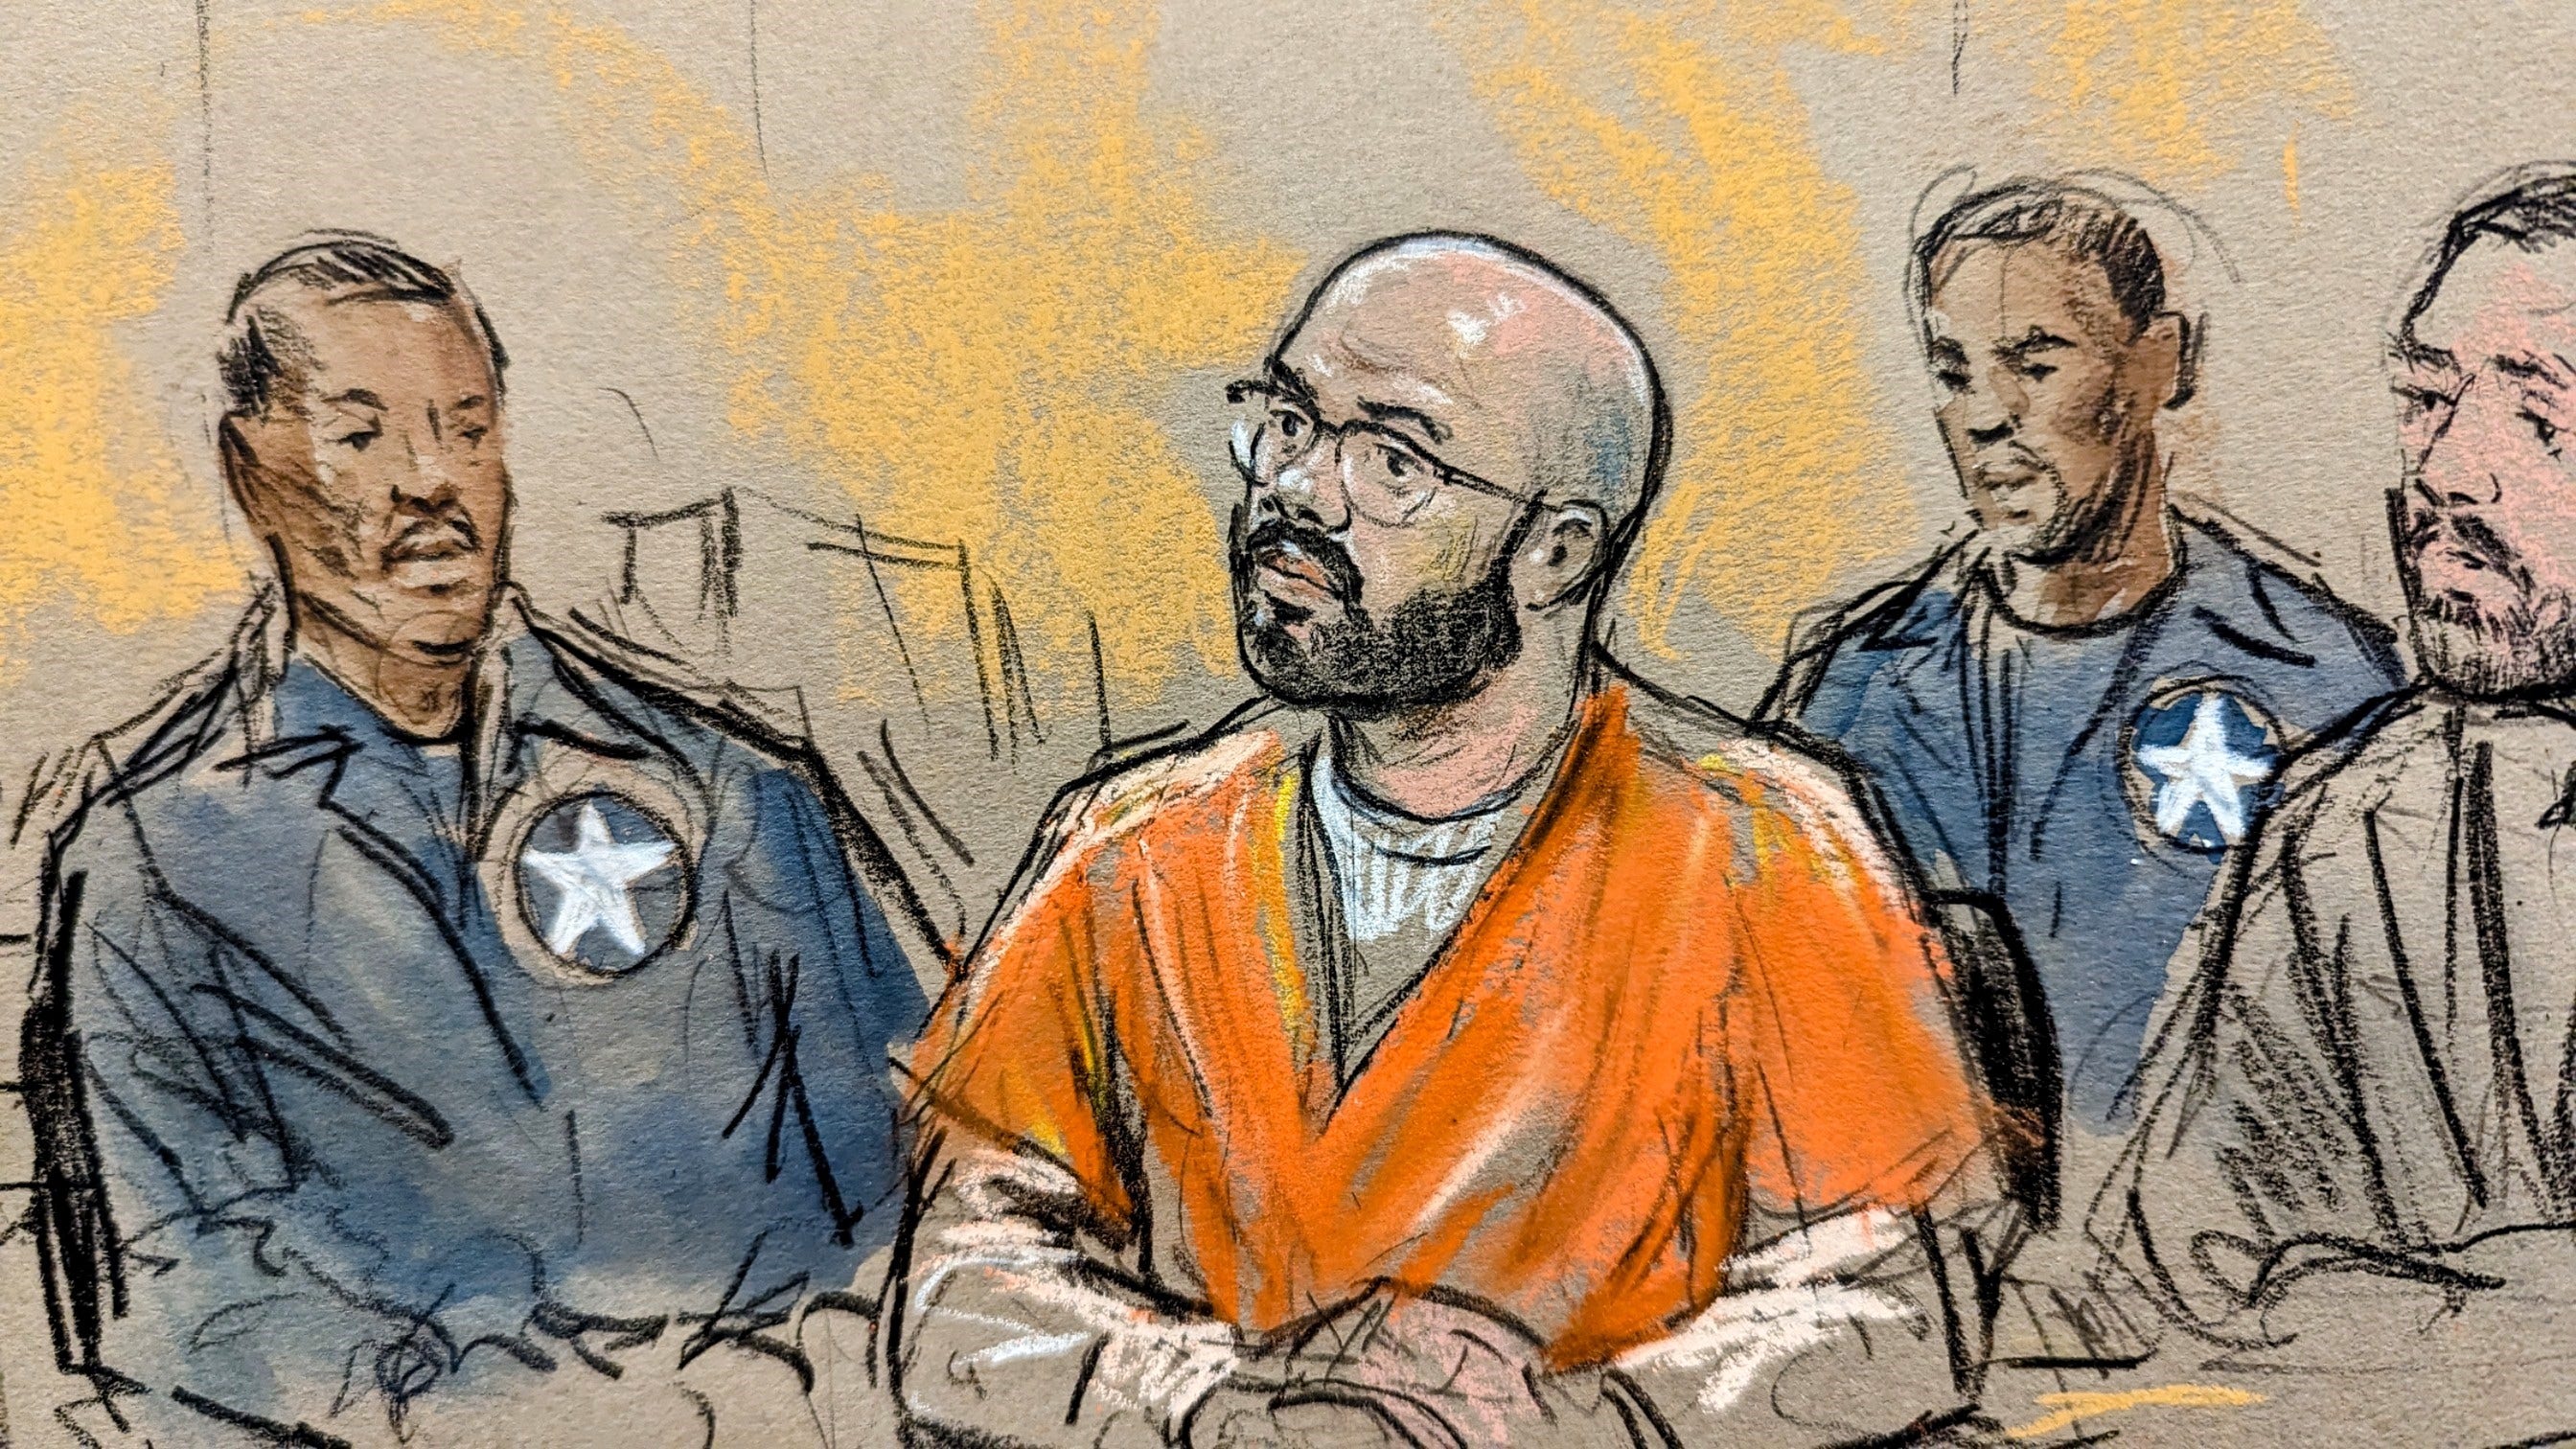 Former Proud Boys Leader Enrique Tarrio Sentenced To 22 Years For Jan 6 Attack Fox News 0285